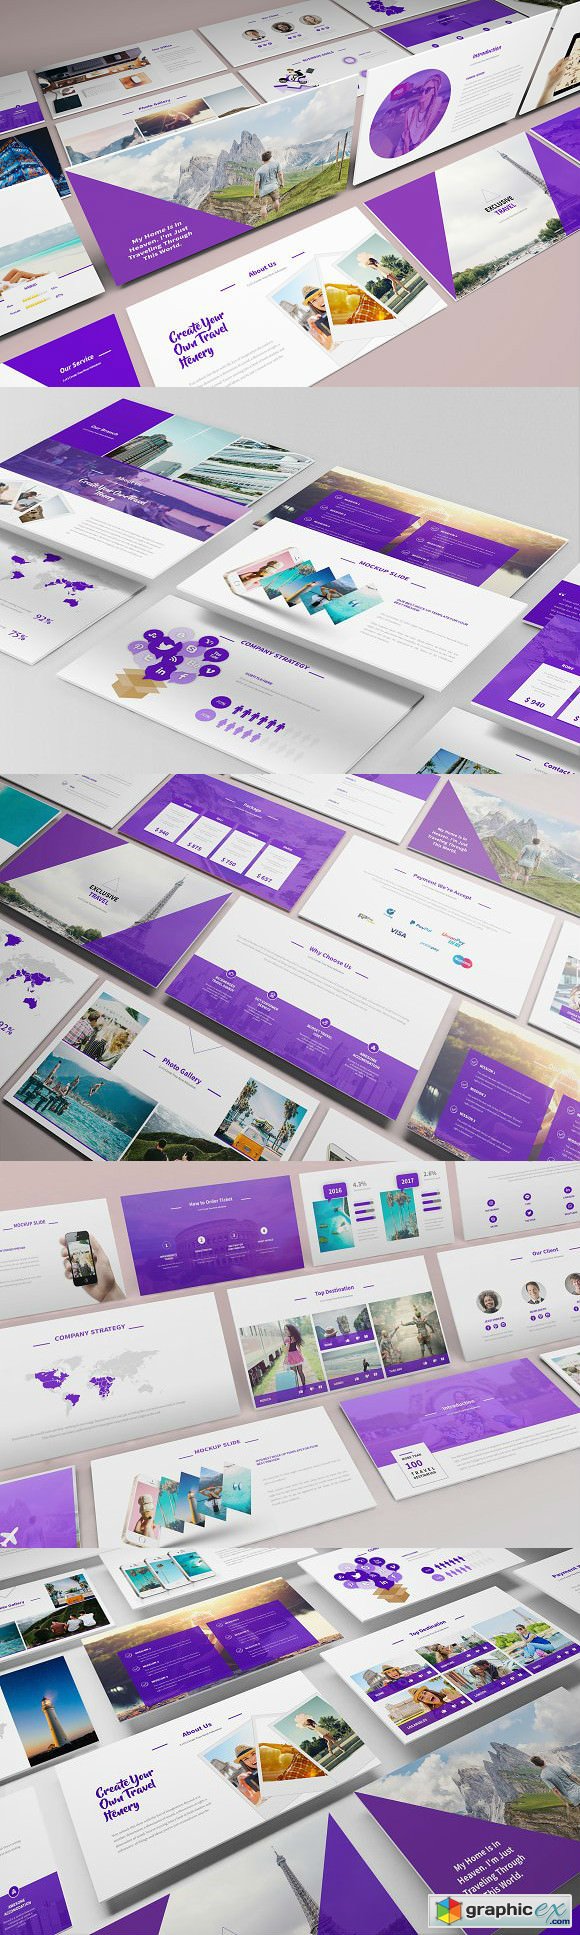 Travel Agency Powerpoint Template 2288707